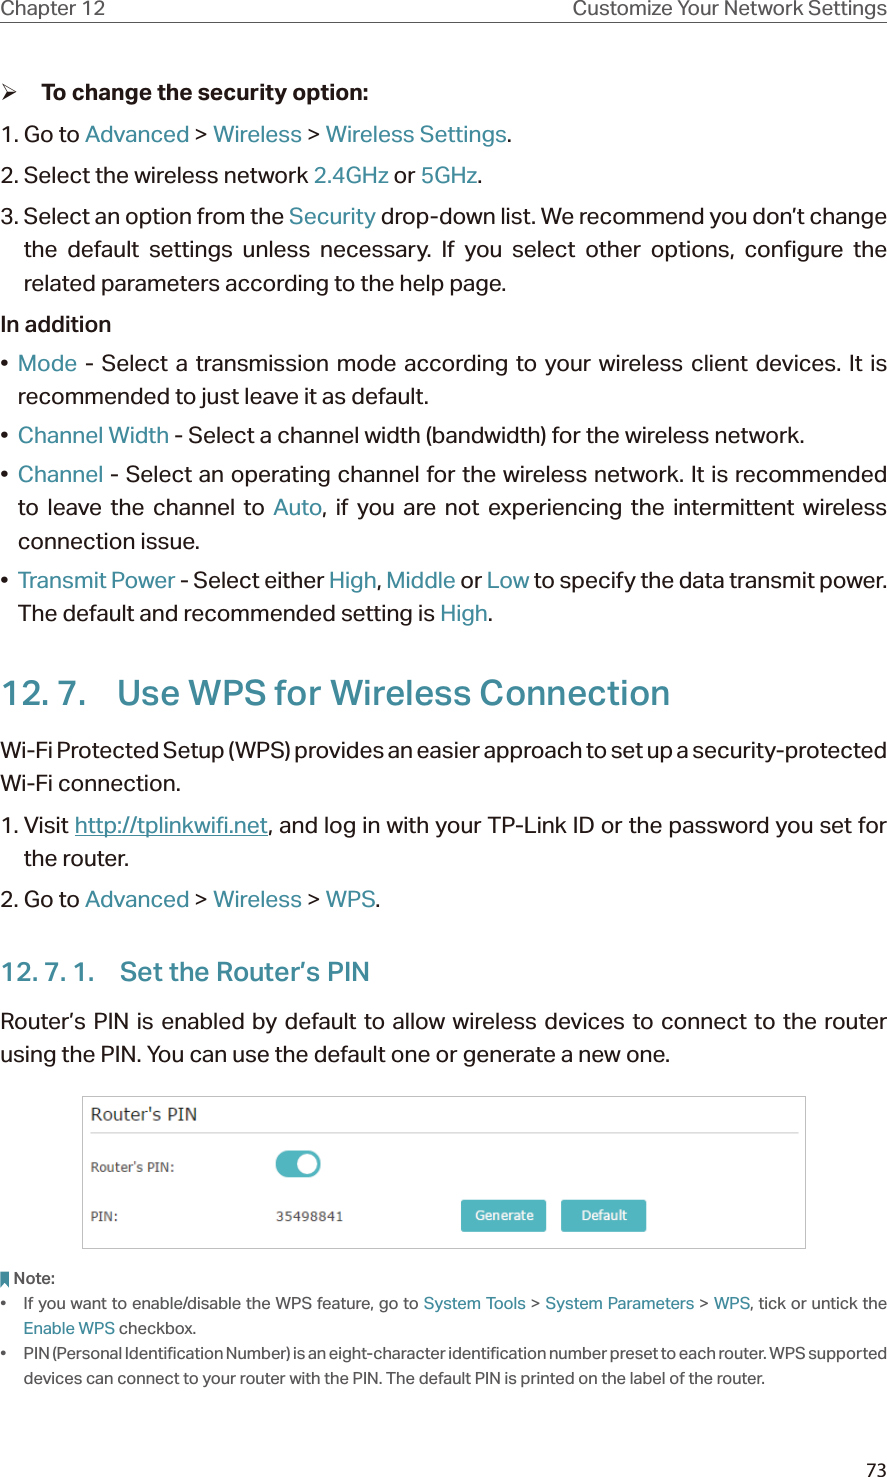 73Chapter 12 Customize Your Network Settings ¾To change the security option:1. Go to Advanced &gt; Wireless &gt; Wireless Settings. 2. Select the wireless network 2.4GHz or 5GHz.3. Select an option from the Security drop-down list. We recommend you don’t change the default settings unless necessary. If you select other options, configure the related parameters according to the help page.In addition•  Mode - Select a transmission mode according to your wireless client devices. It is recommended to just leave it as default.•  Channel Width - Select a channel width (bandwidth) for the wireless network.•  Channel - Select an operating channel for the wireless network. It is recommended to leave the channel to Auto, if you are not experiencing the intermittent wireless connection issue.•  Transmit Power - Select either High, Middle or Low to specify the data transmit power. The default and recommended setting is High.12. 7.  Use WPS for Wireless ConnectionWi-Fi Protected Setup (WPS) provides an easier approach to set up a security-protected Wi-Fi connection.1. Visit http://tplinkwifi.net, and log in with your TP-Link ID or the password you set for the router.2. Go to Advanced &gt; Wireless &gt; WPS.12. 7. 1.  Set the Router’s PINRouter’s PIN is enabled by default to allow wireless devices to connect to the router using the PIN. You can use the default one or generate a new one.Note:•  If you want to enable/disable the WPS feature, go to System Tools &gt; System Parameters &gt; WPS, tick or untick the Enable WPS checkbox.•  PIN (Personal Identification Number) is an eight-character identification number preset to each router. WPS supported devices can connect to your router with the PIN. The default PIN is printed on the label of the router.